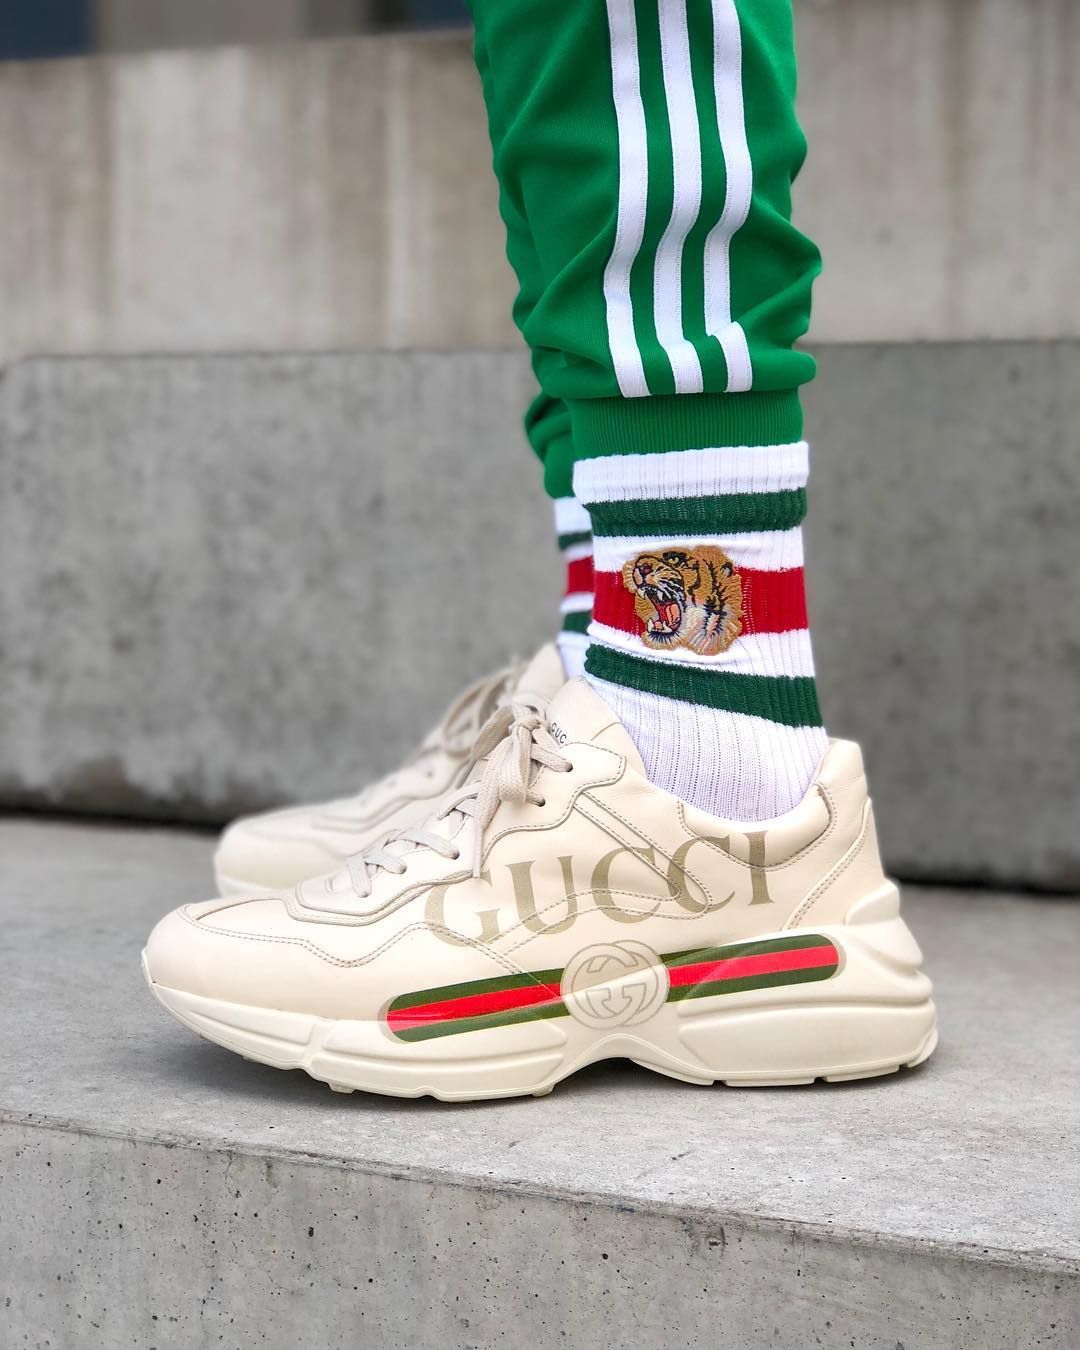 trends shoes for men, winter 2019, gucci sneakers, big shoes